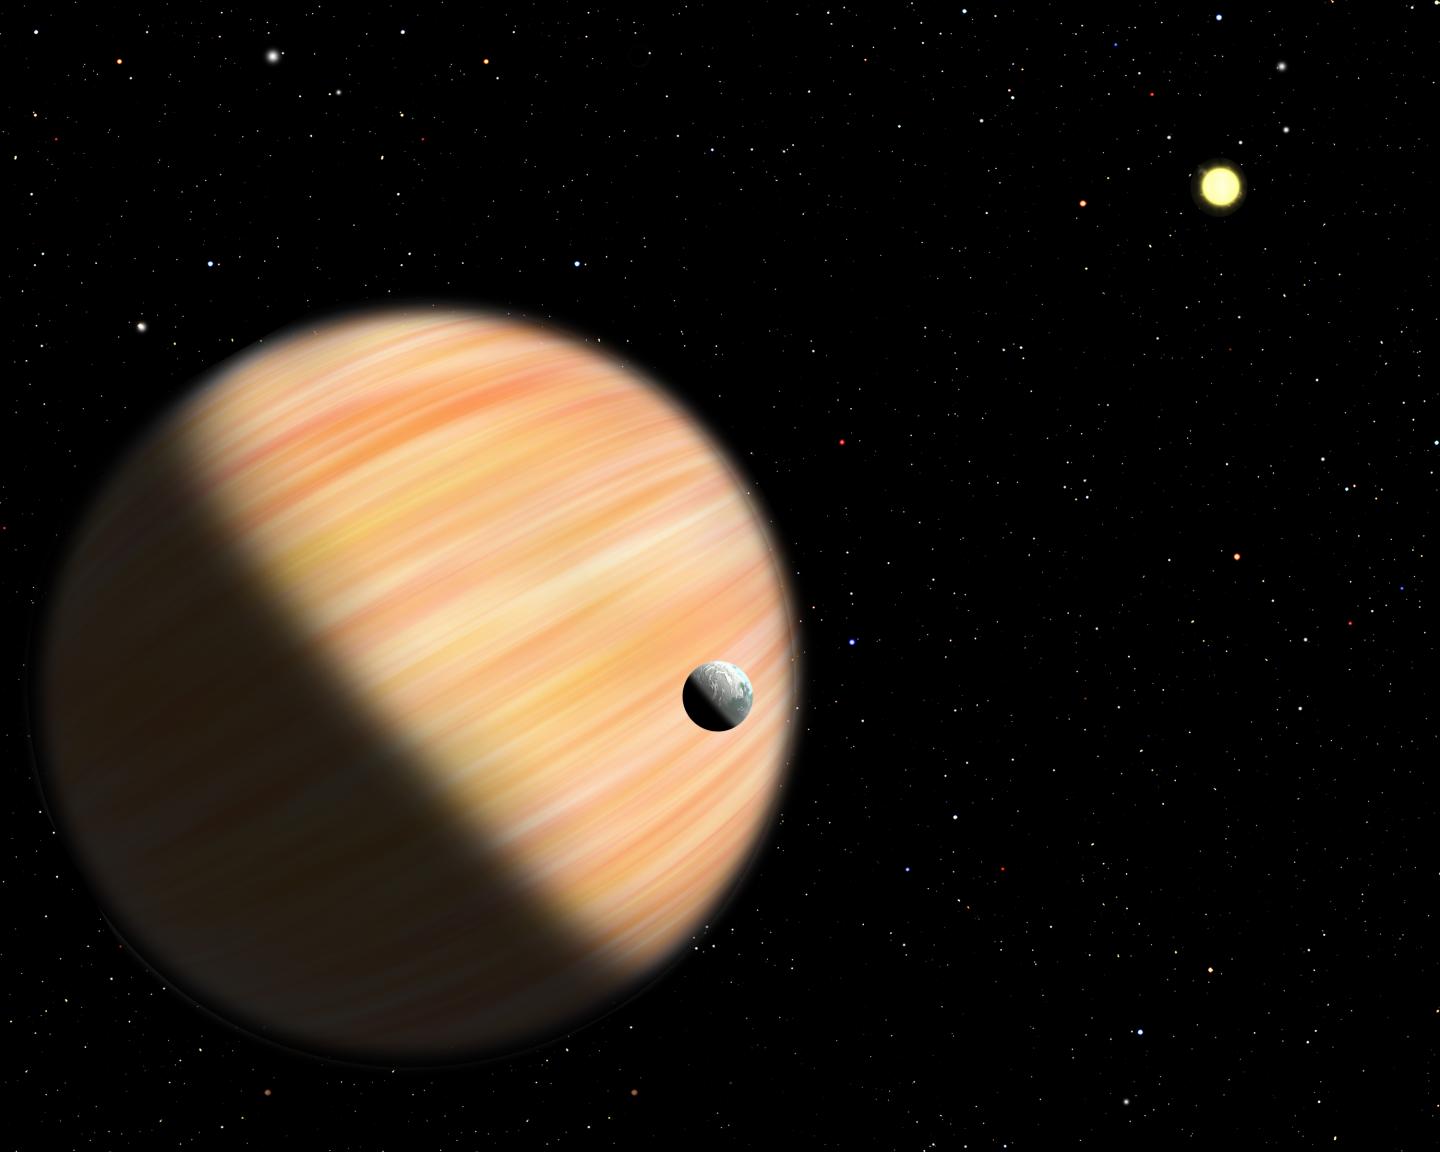 Artist's Conception of Microlens Planet